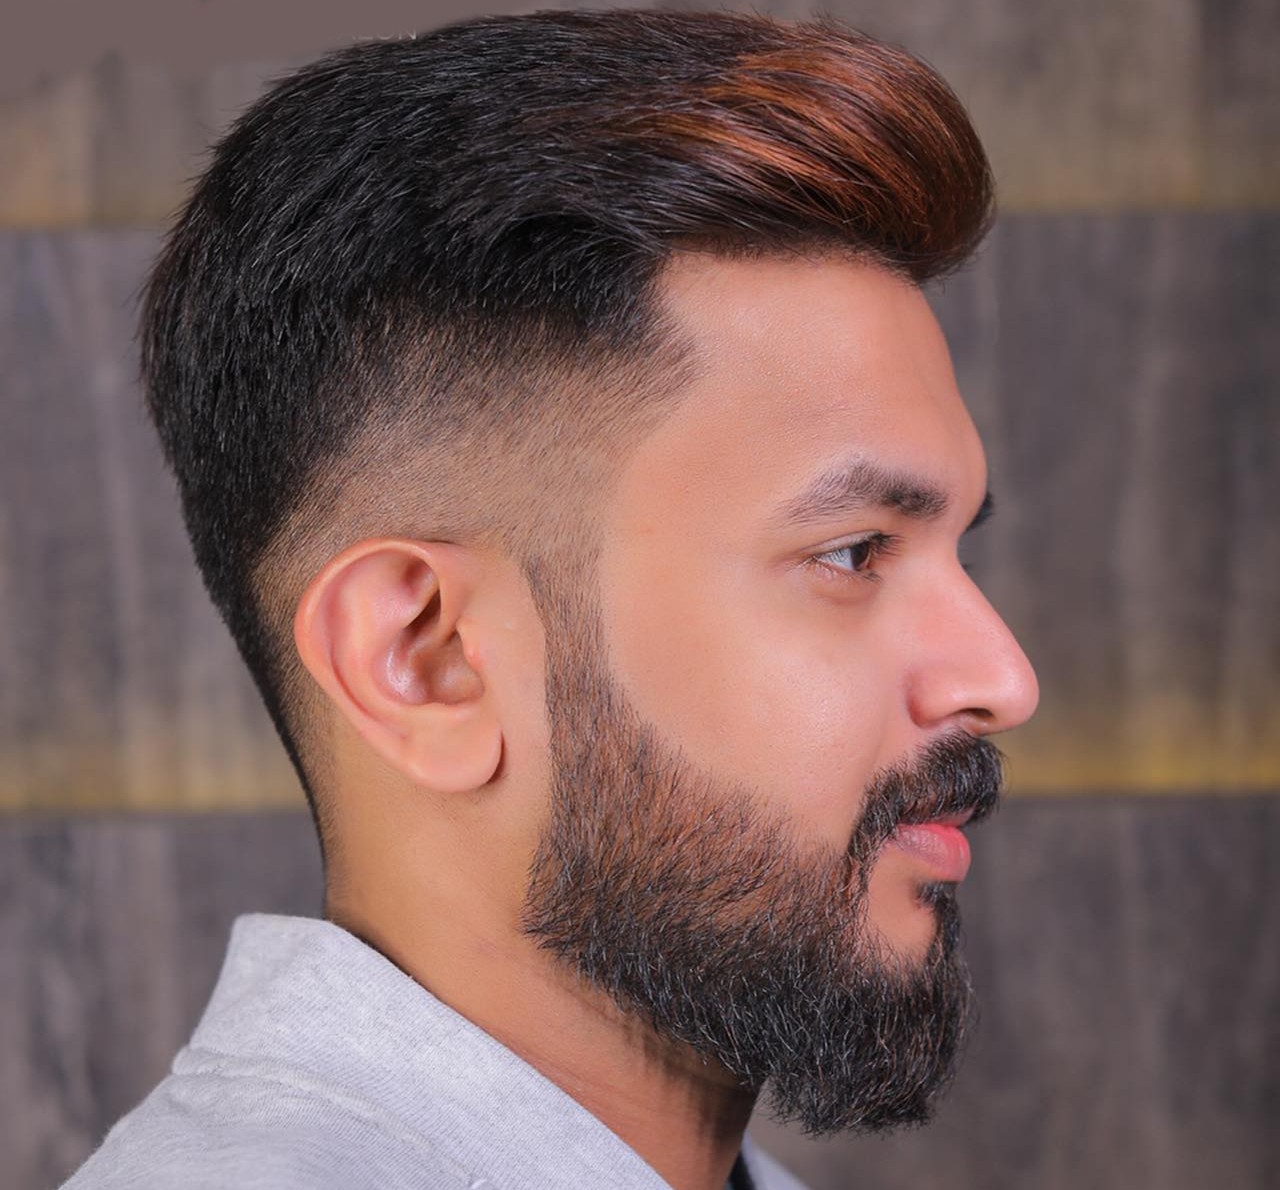 Salon for Men | Hair Cut and Styling, Hair Coloring and Hair Care Services  for Men